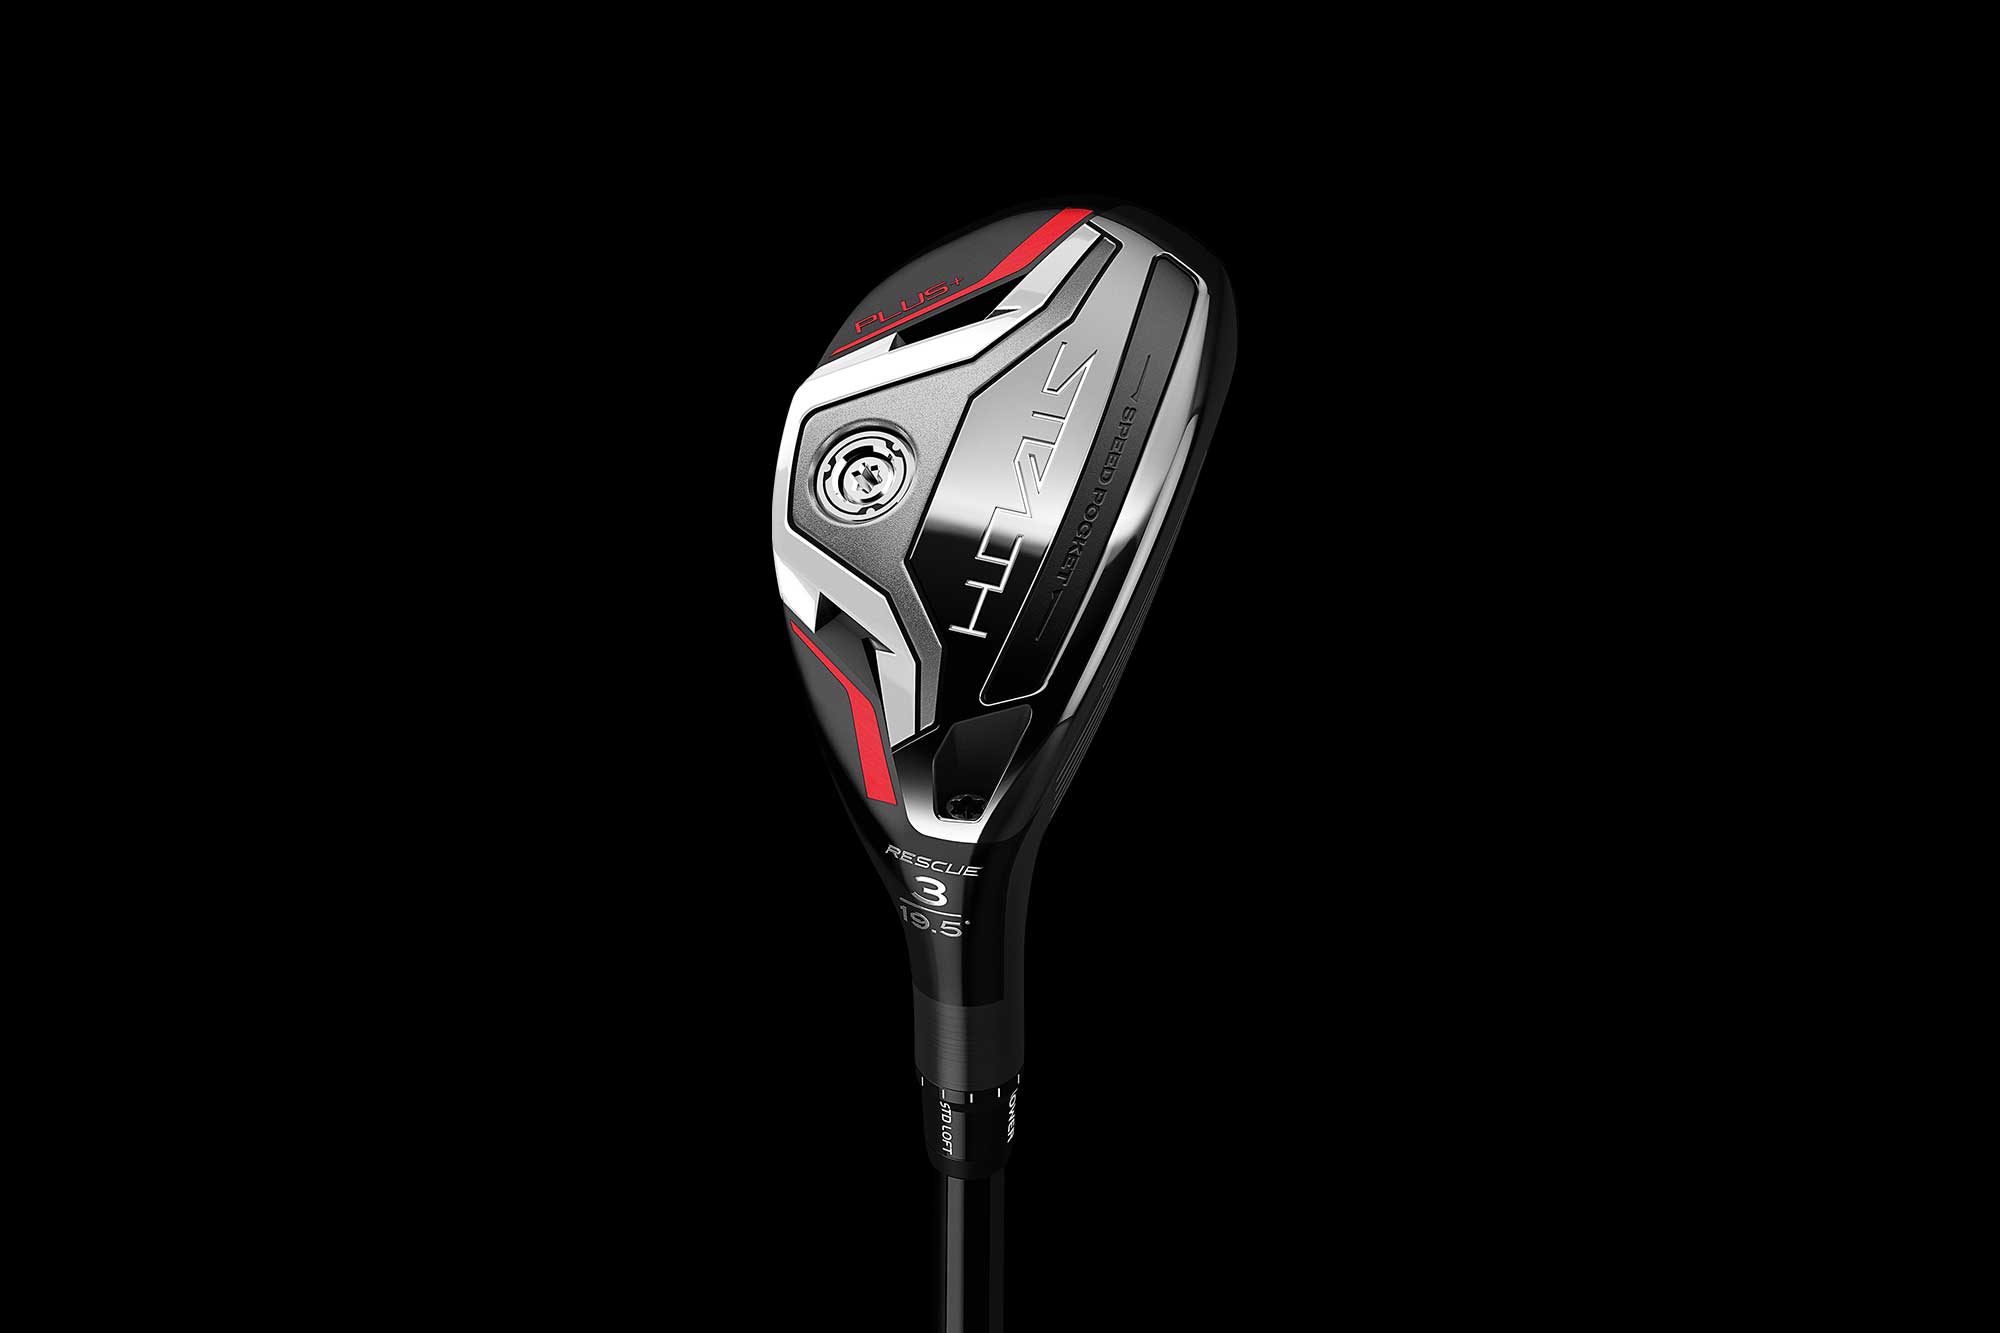 TaylorMade Stealth Hybrids